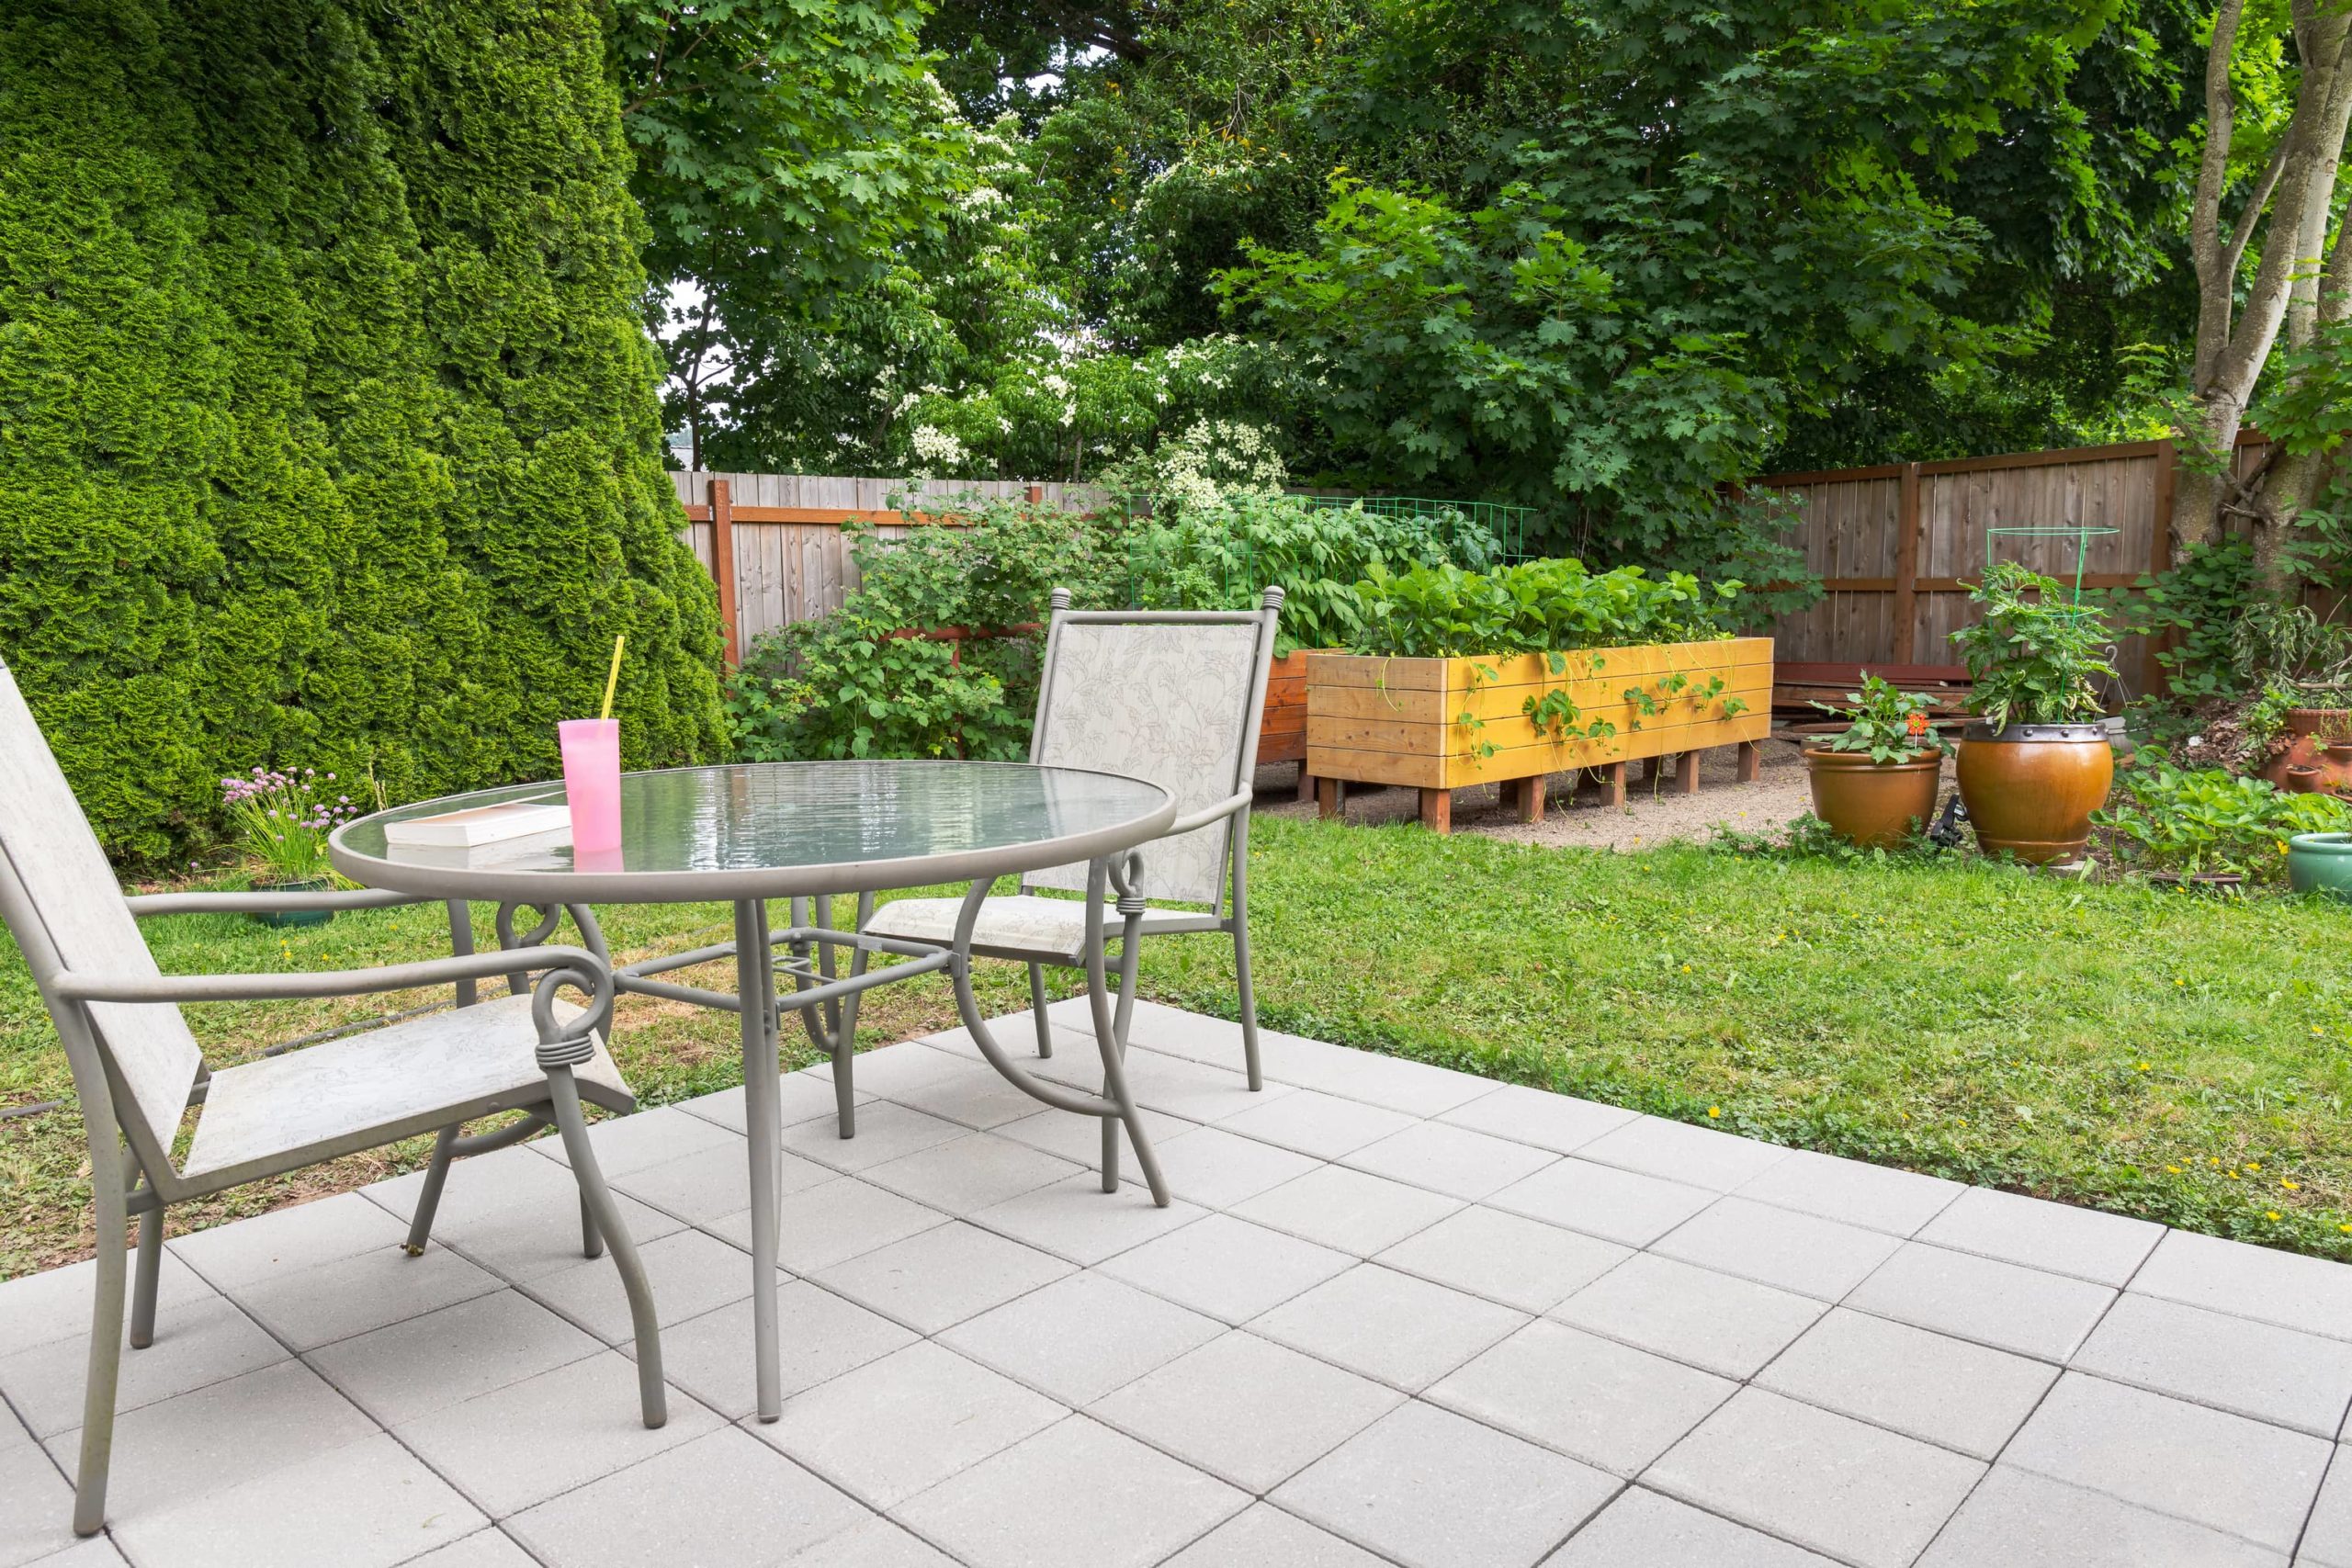 This is an image of a backyard concrete patio with stamped tile design.